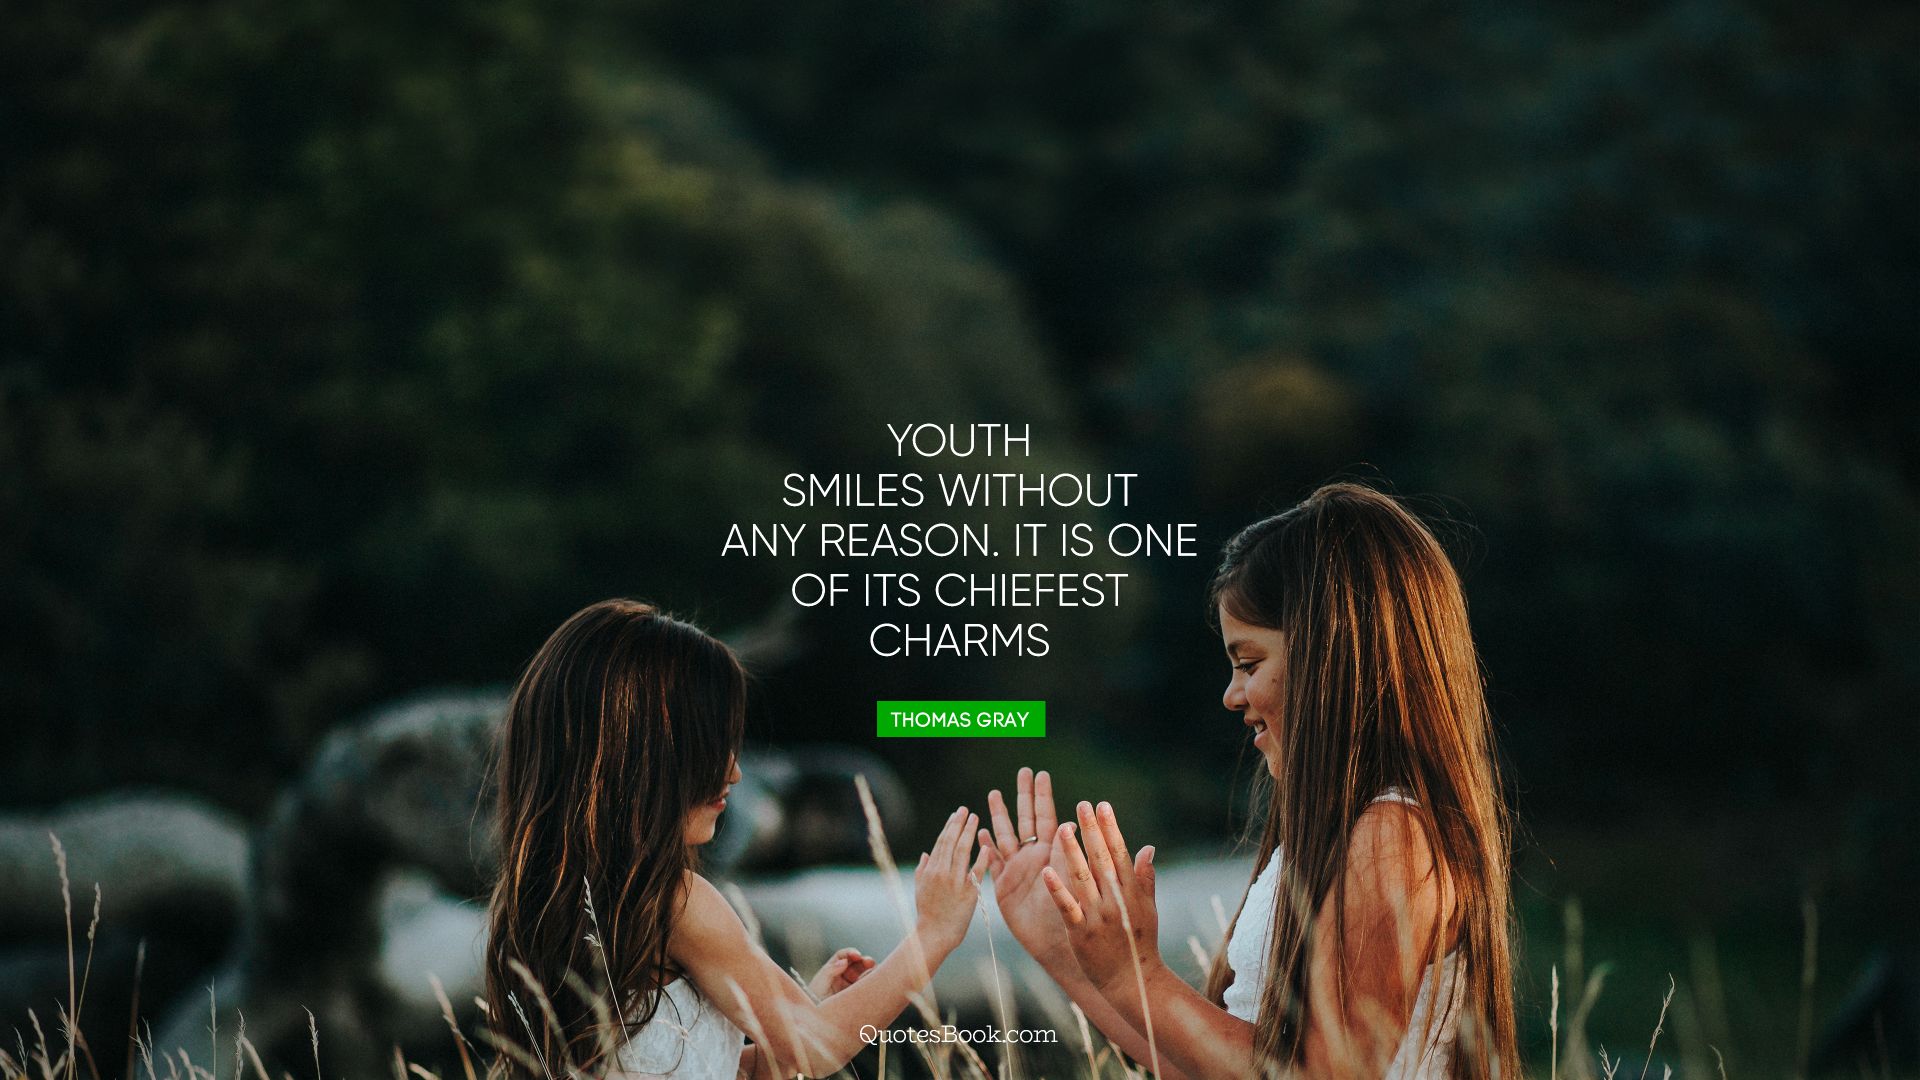 Youth smiles without any reason. It is one of its chiefest charms. - Quote by Thomas Gray